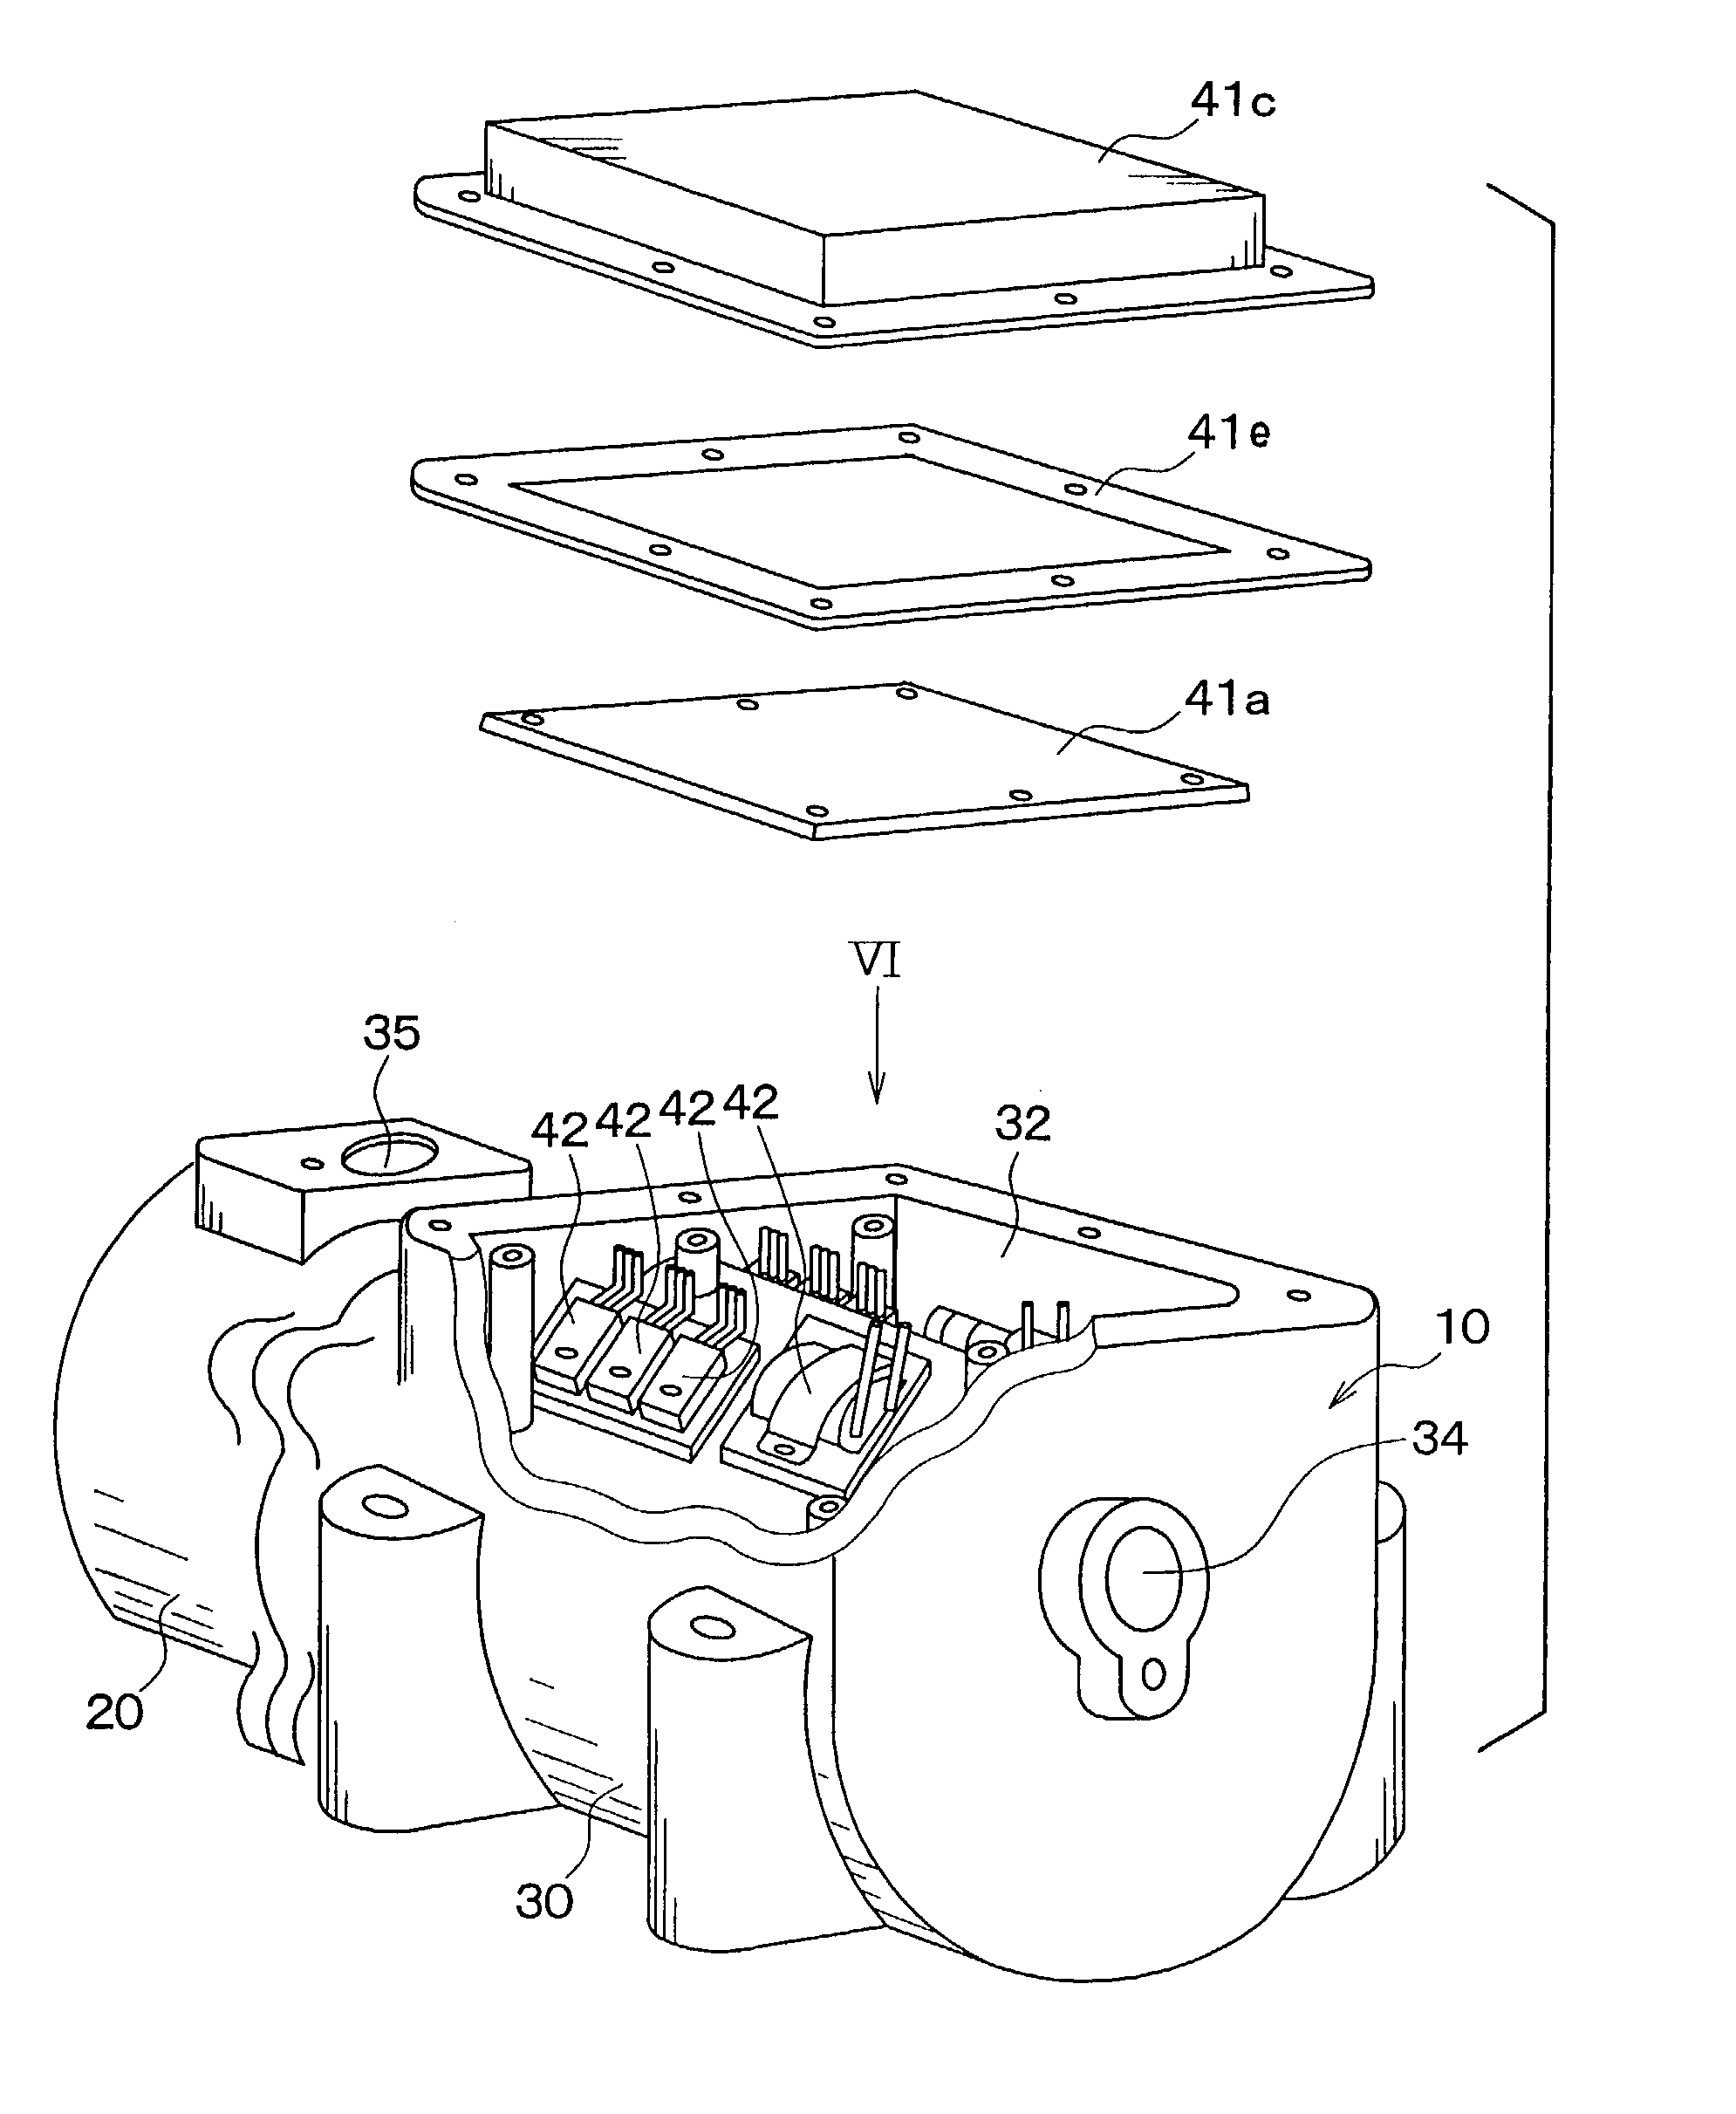 Electric refrigeration compressor having a cooling system for an electrical circuit